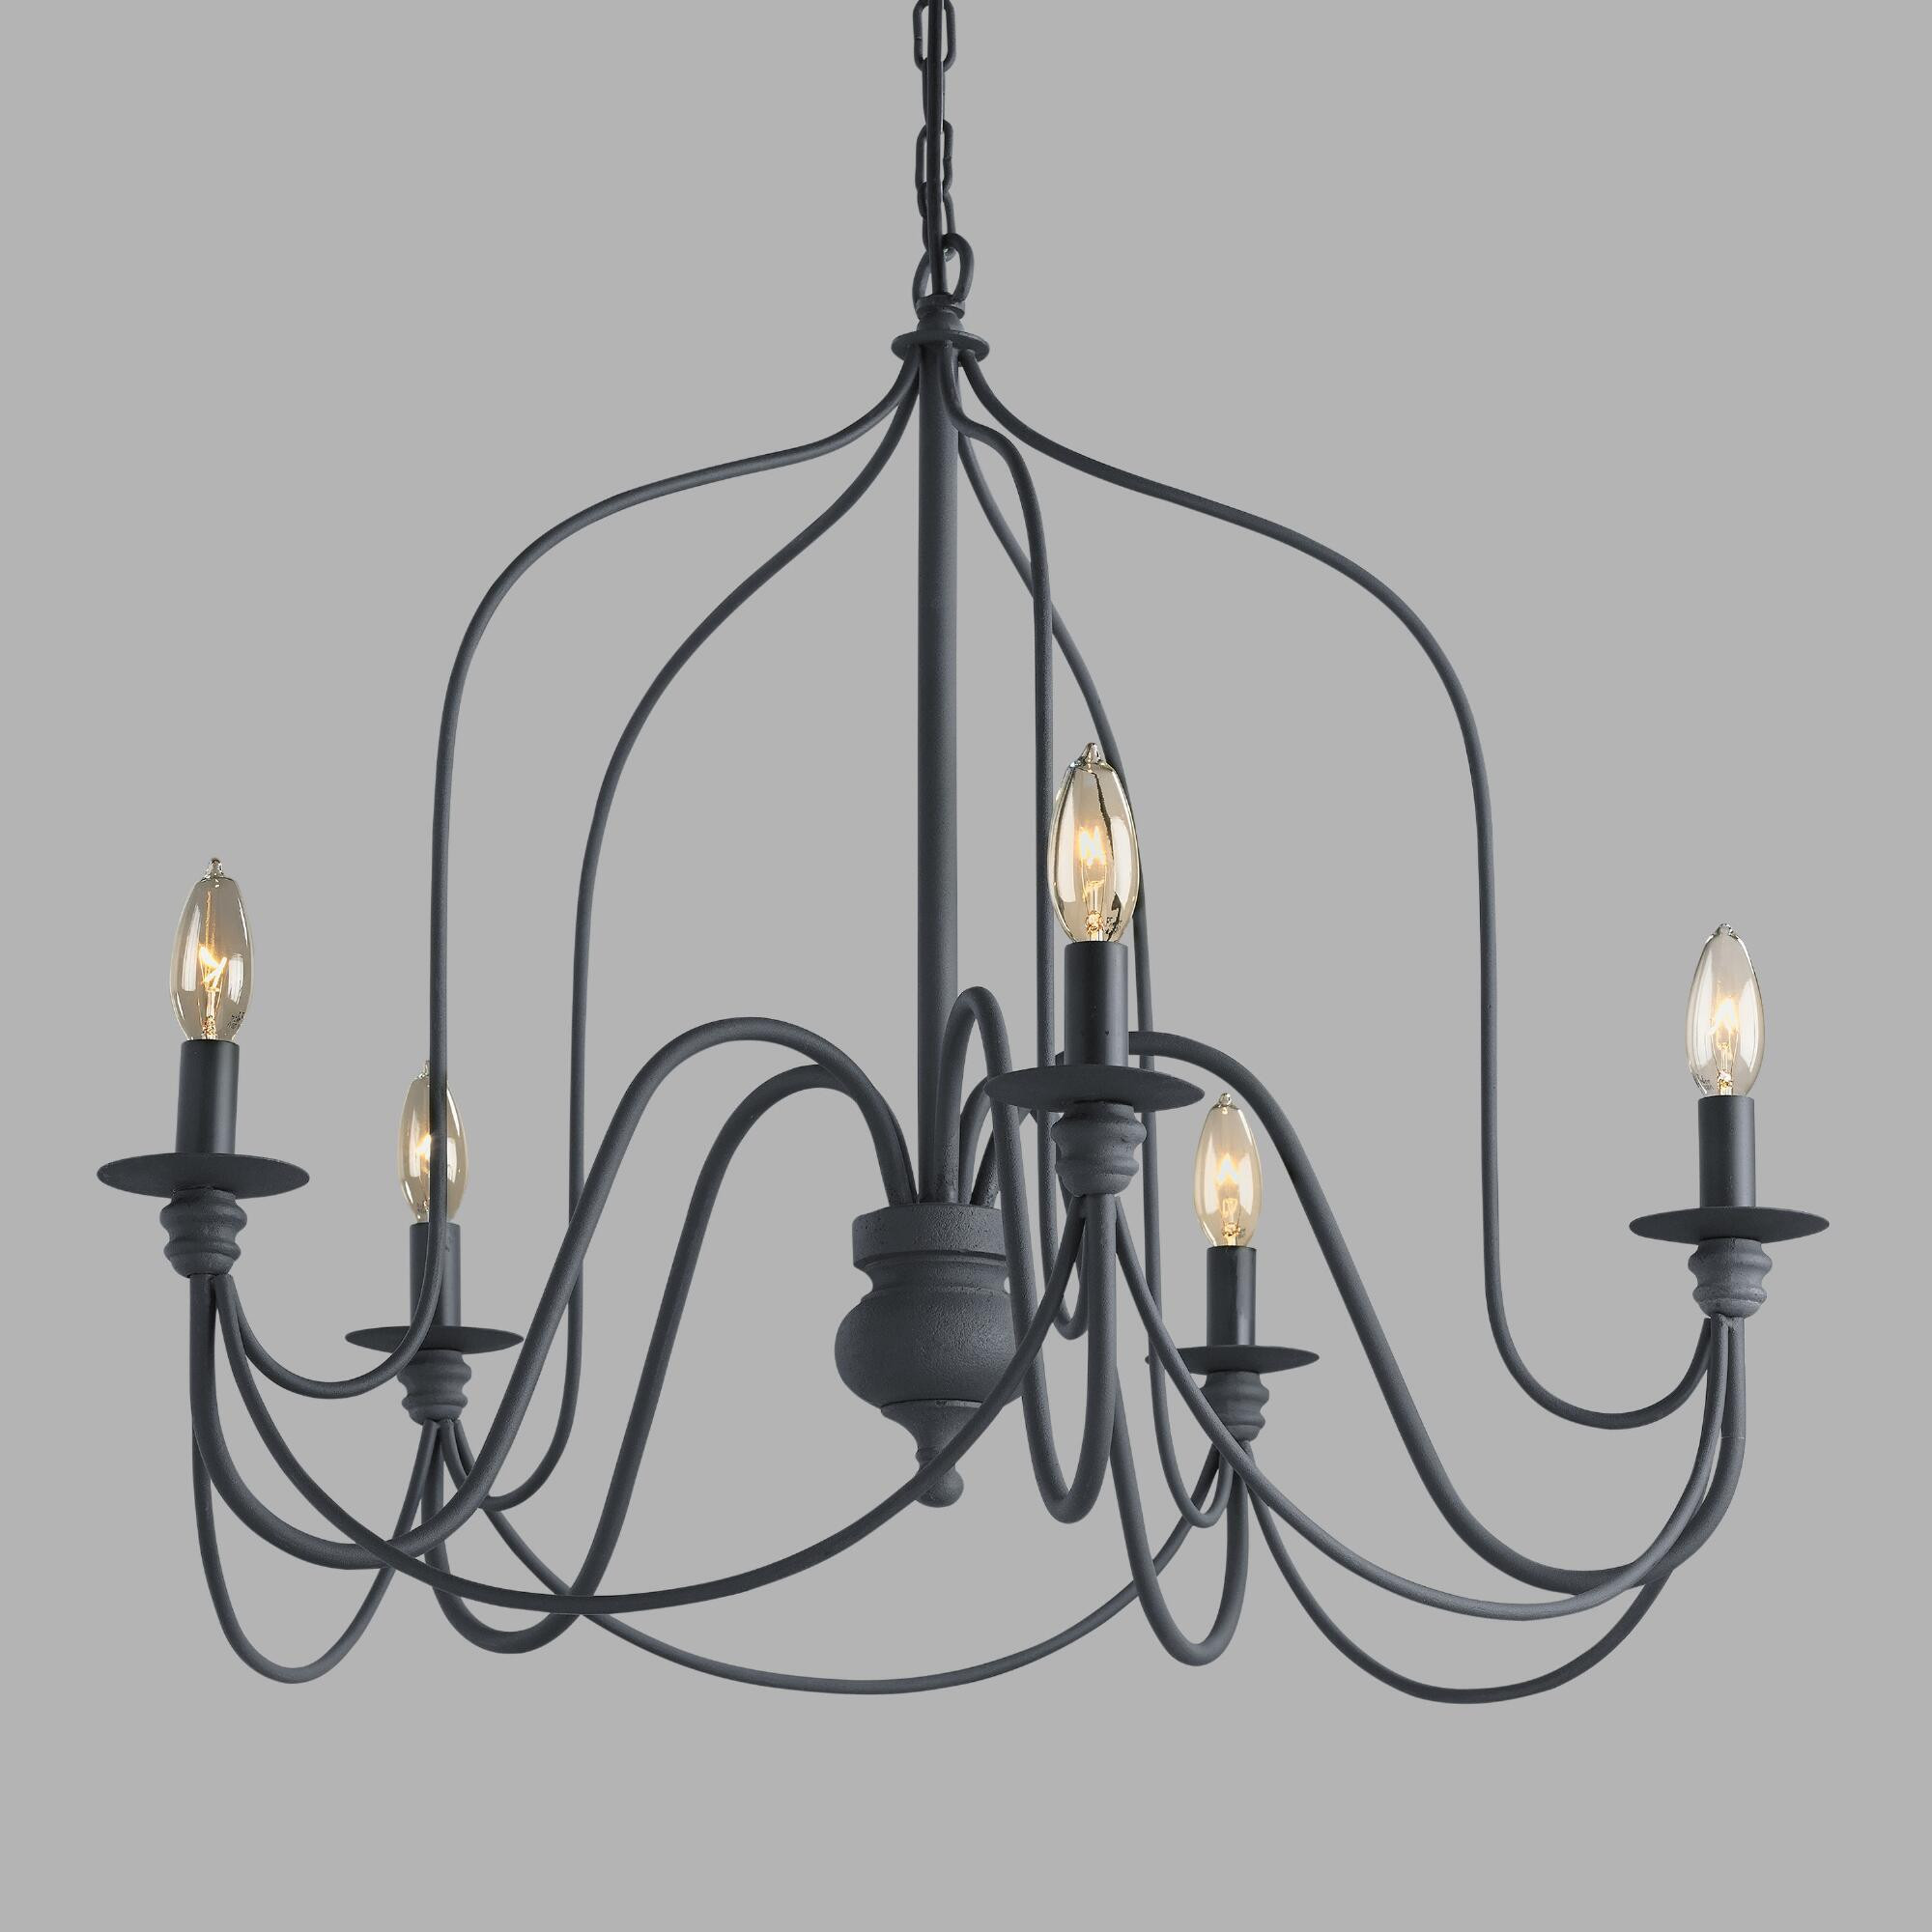 Best ideas about World Market Lighting
. Save or Pin Rustic Wire Chandelier Now.